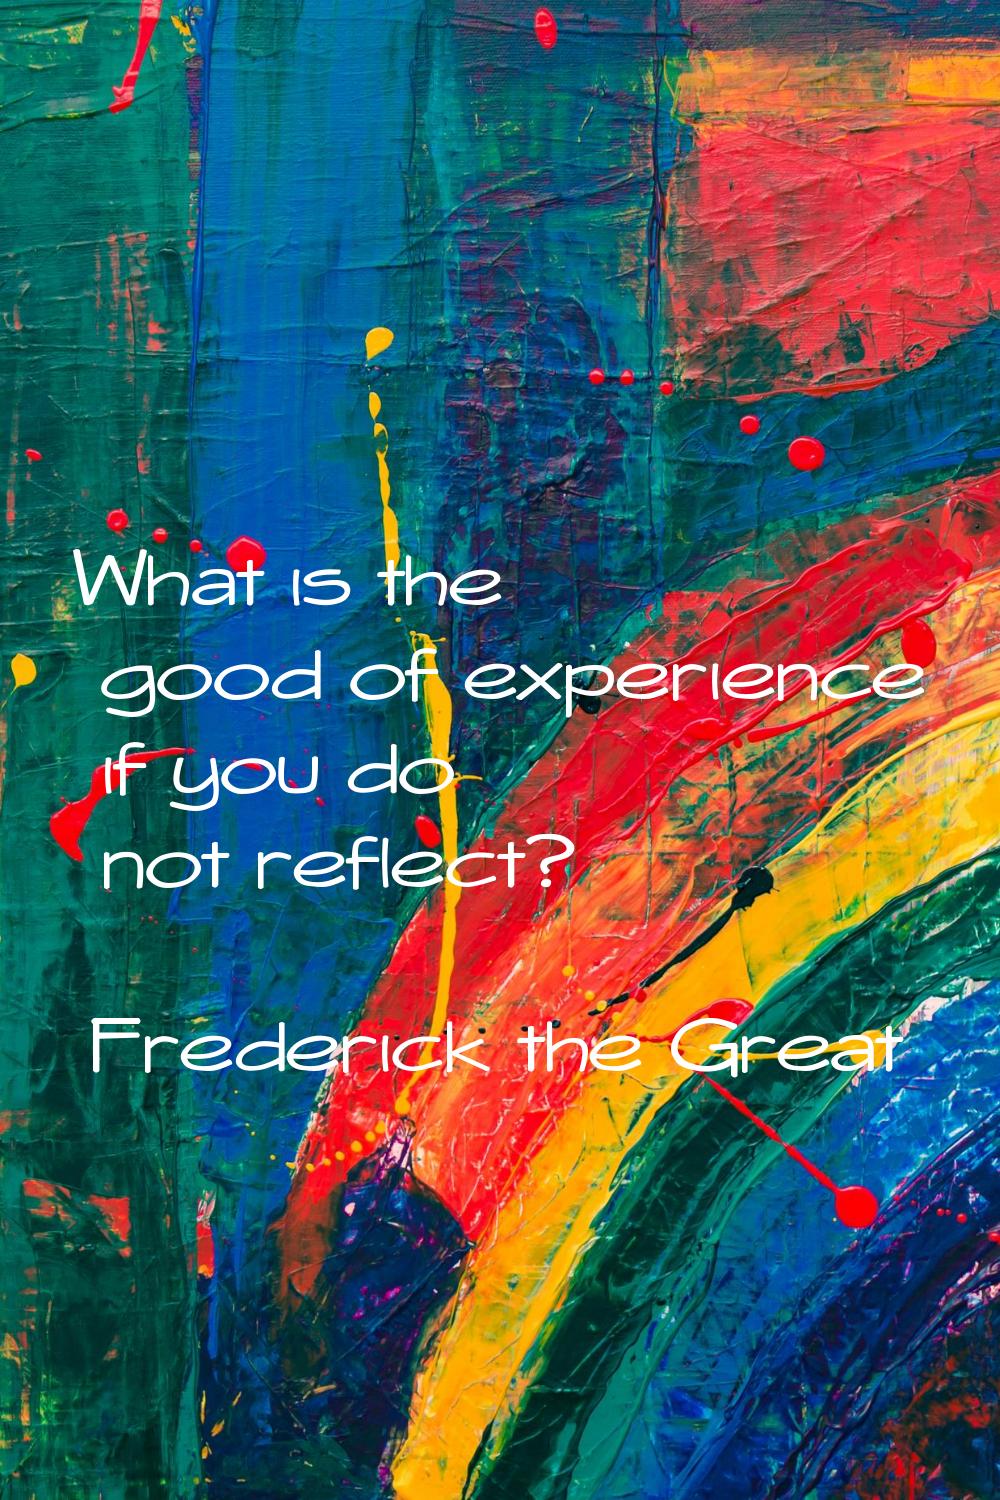 What is the good of experience if you do not reflect?